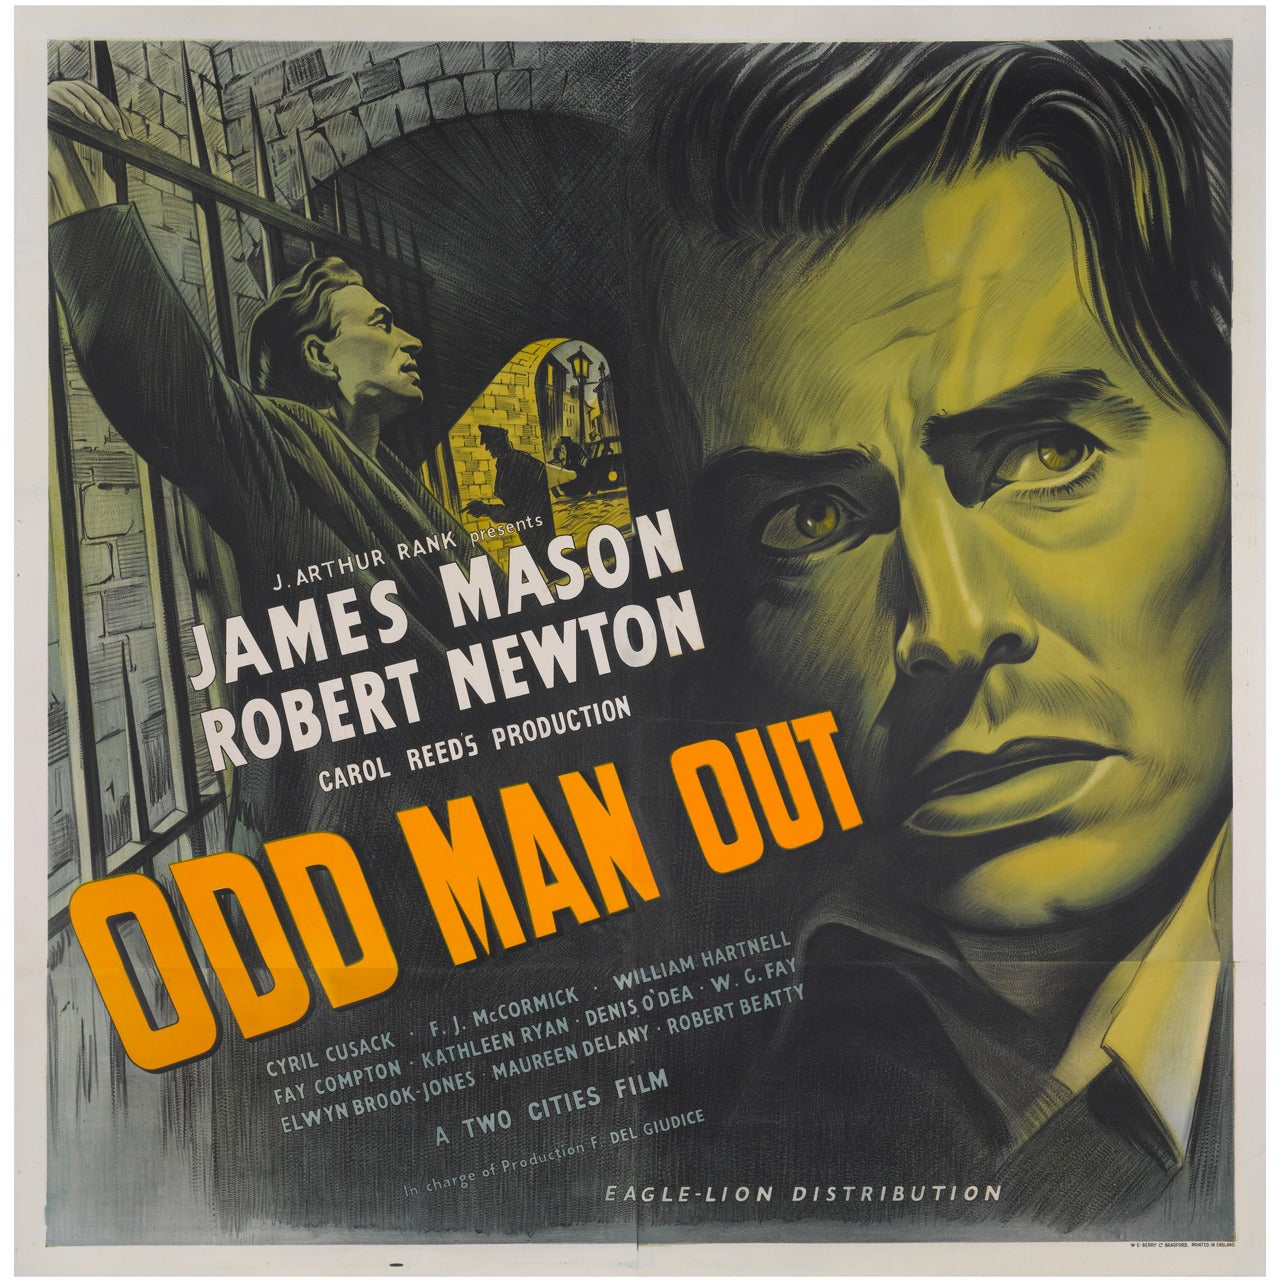 Film Poster for, "Odd Man Out"